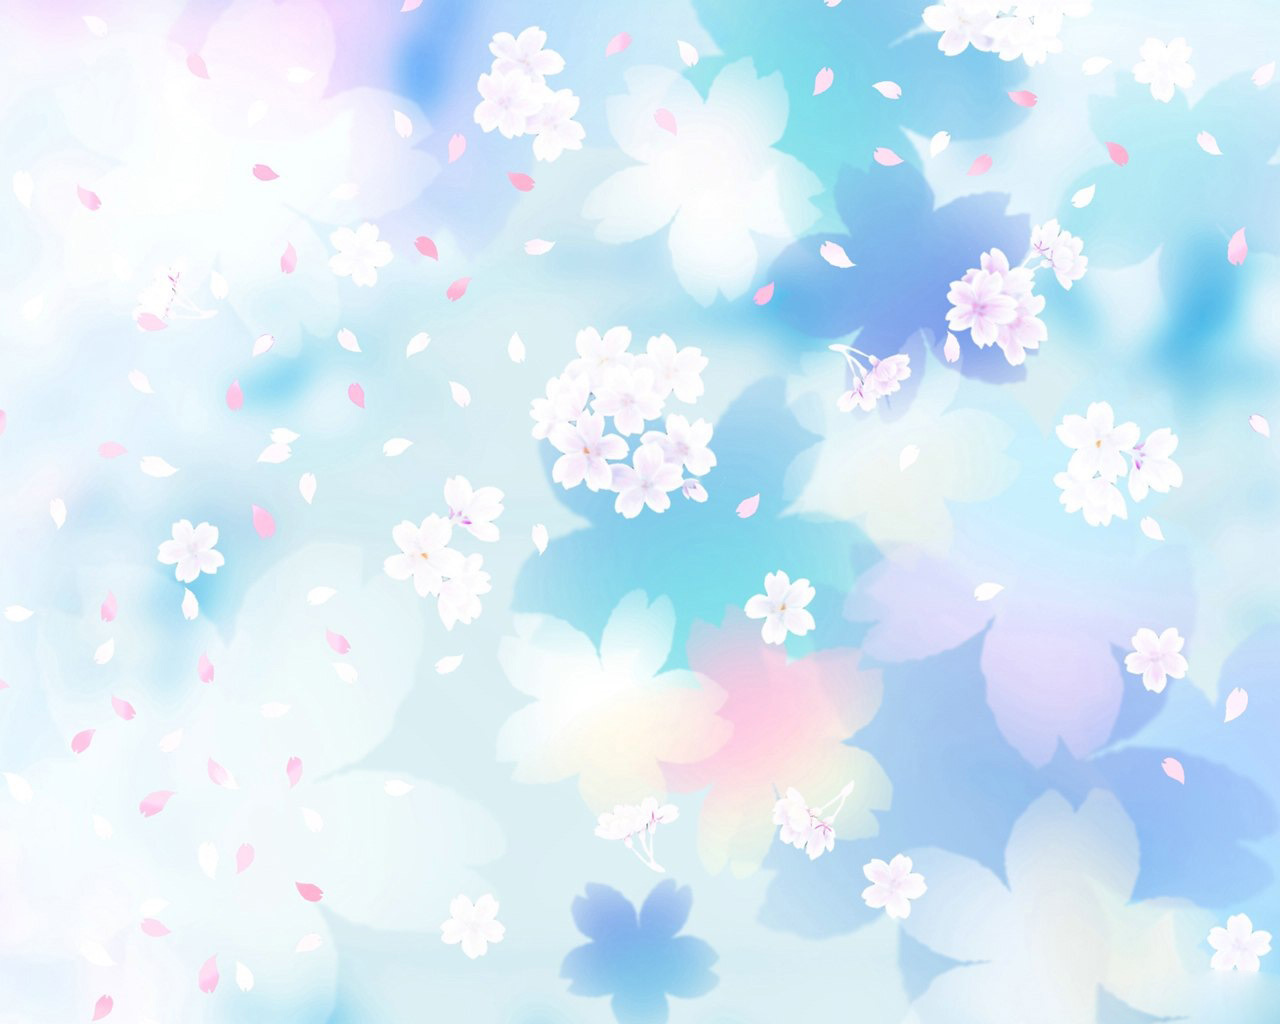  Blue And White Flowers Backgrounds Wallpaper Full HD Wallpapers 1280x1024